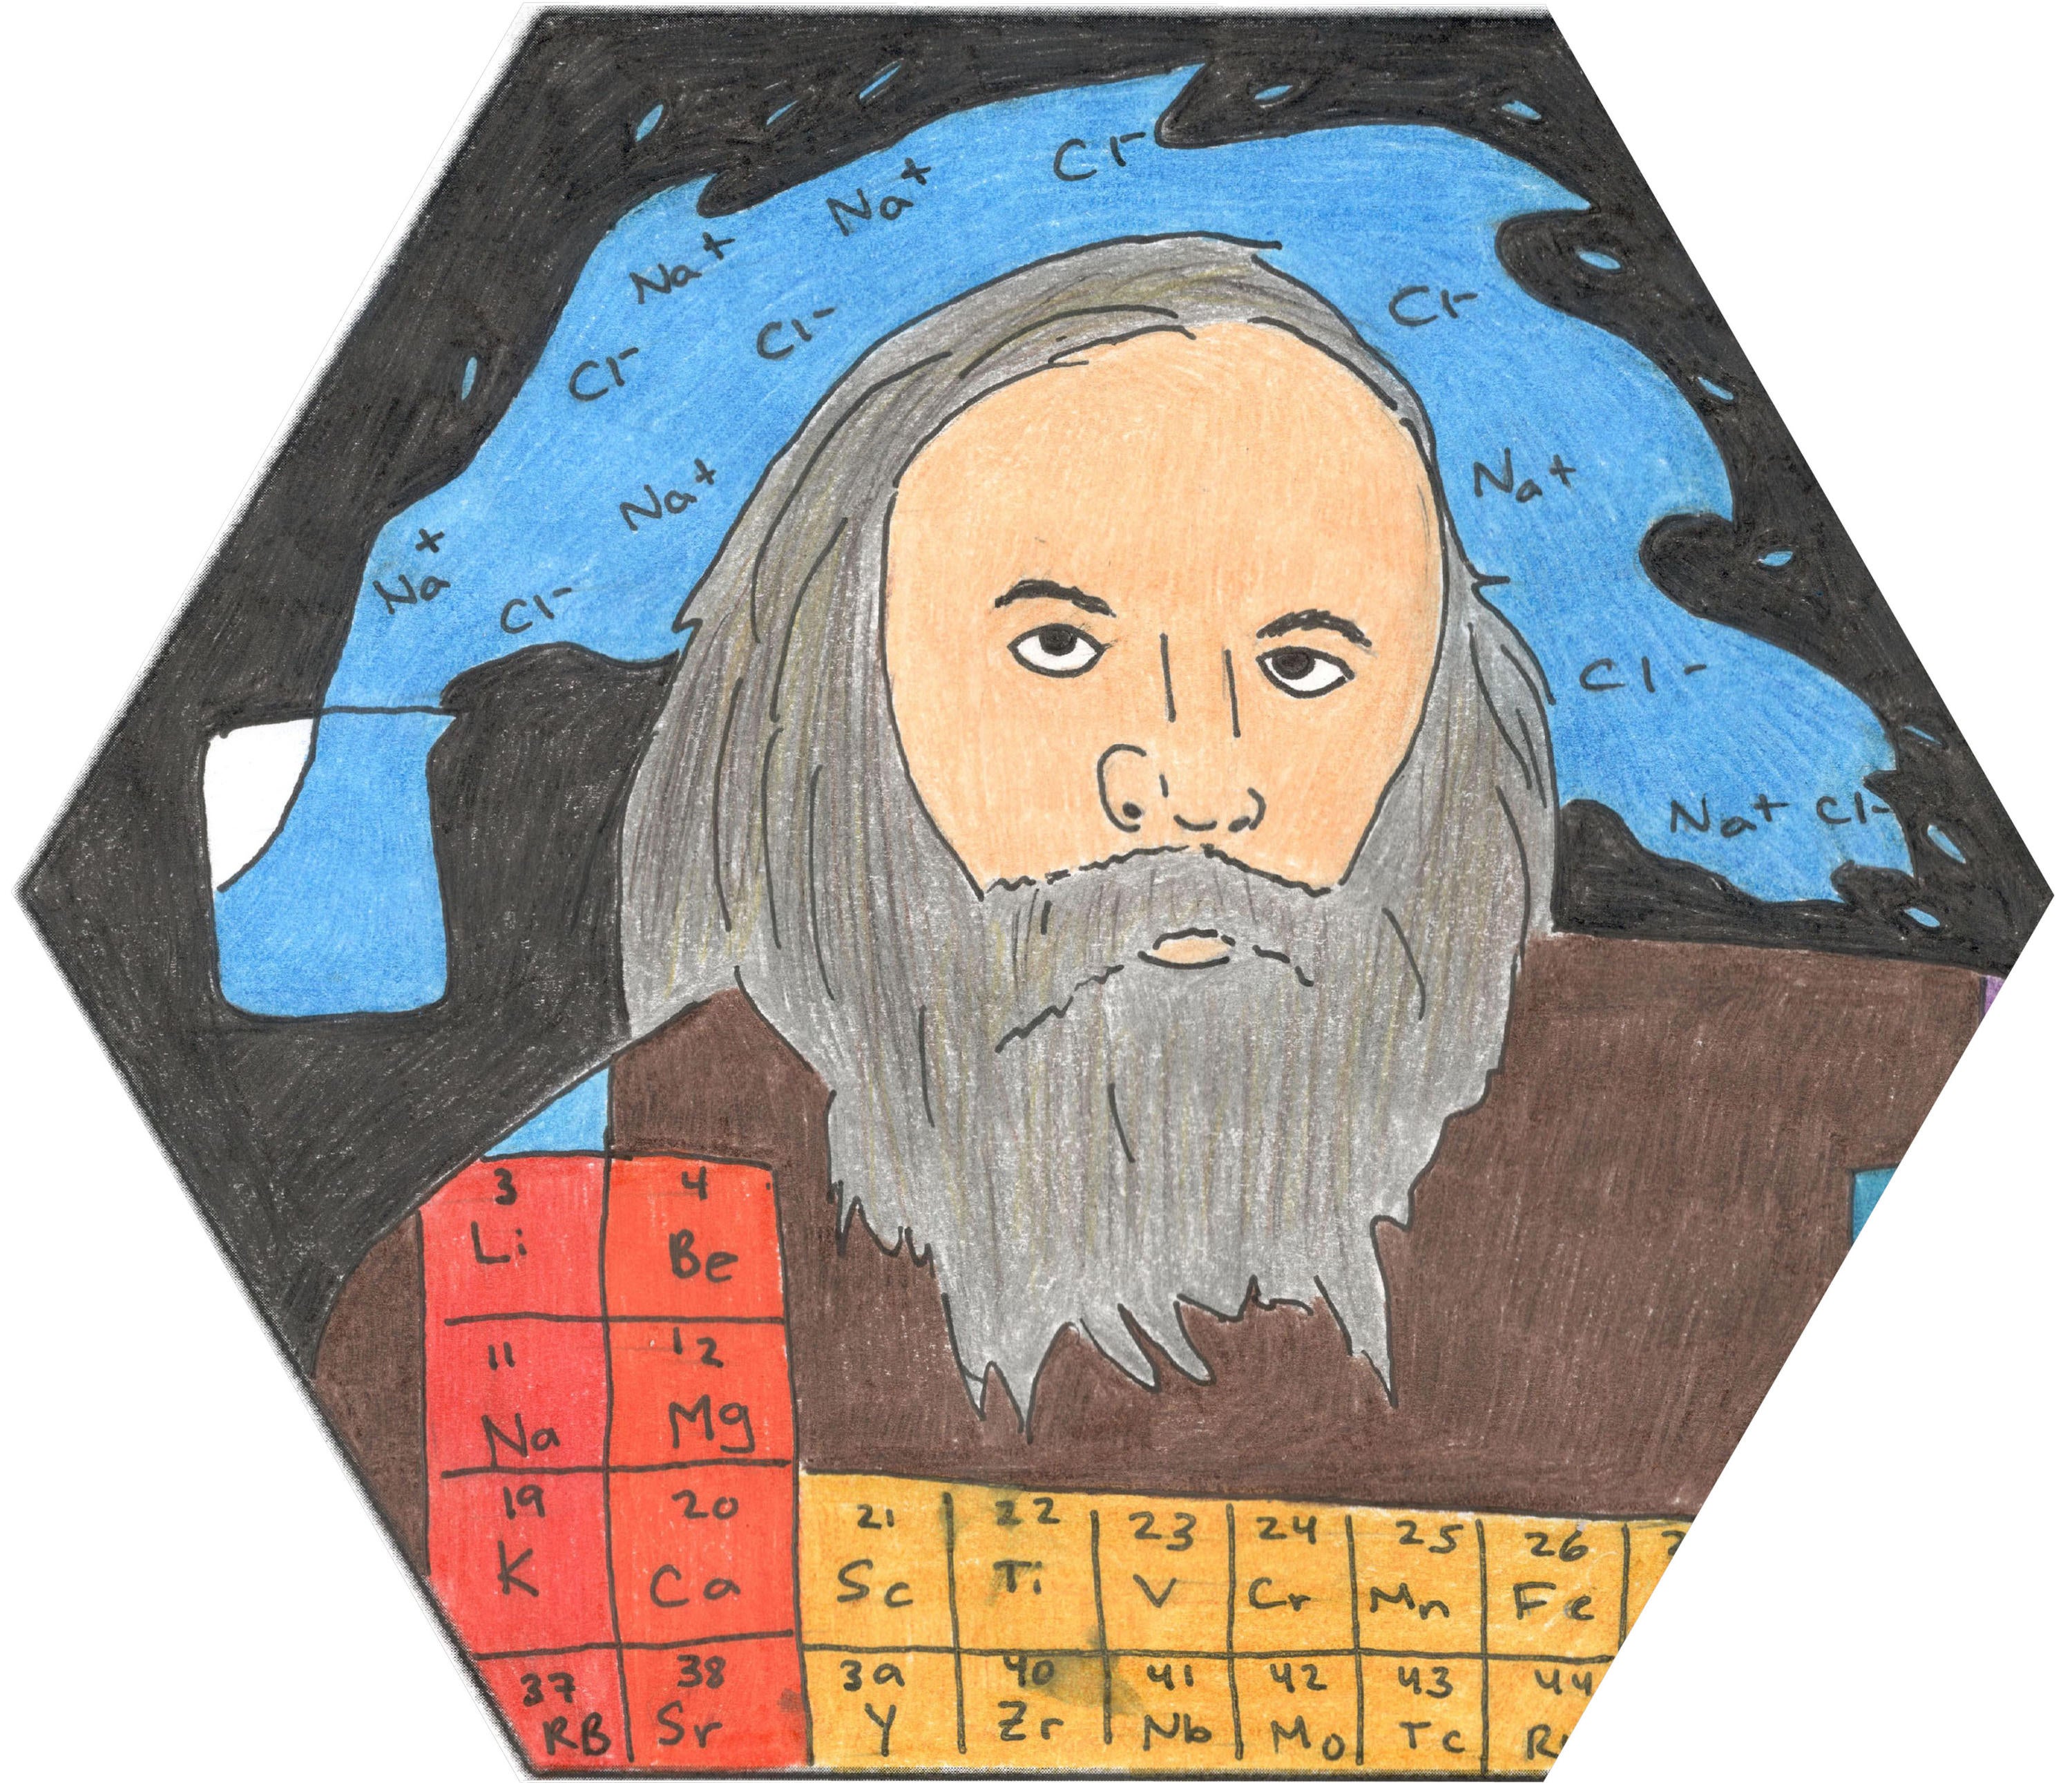 Mendeleev image coloured with pencil crayons with a periodic table in the background